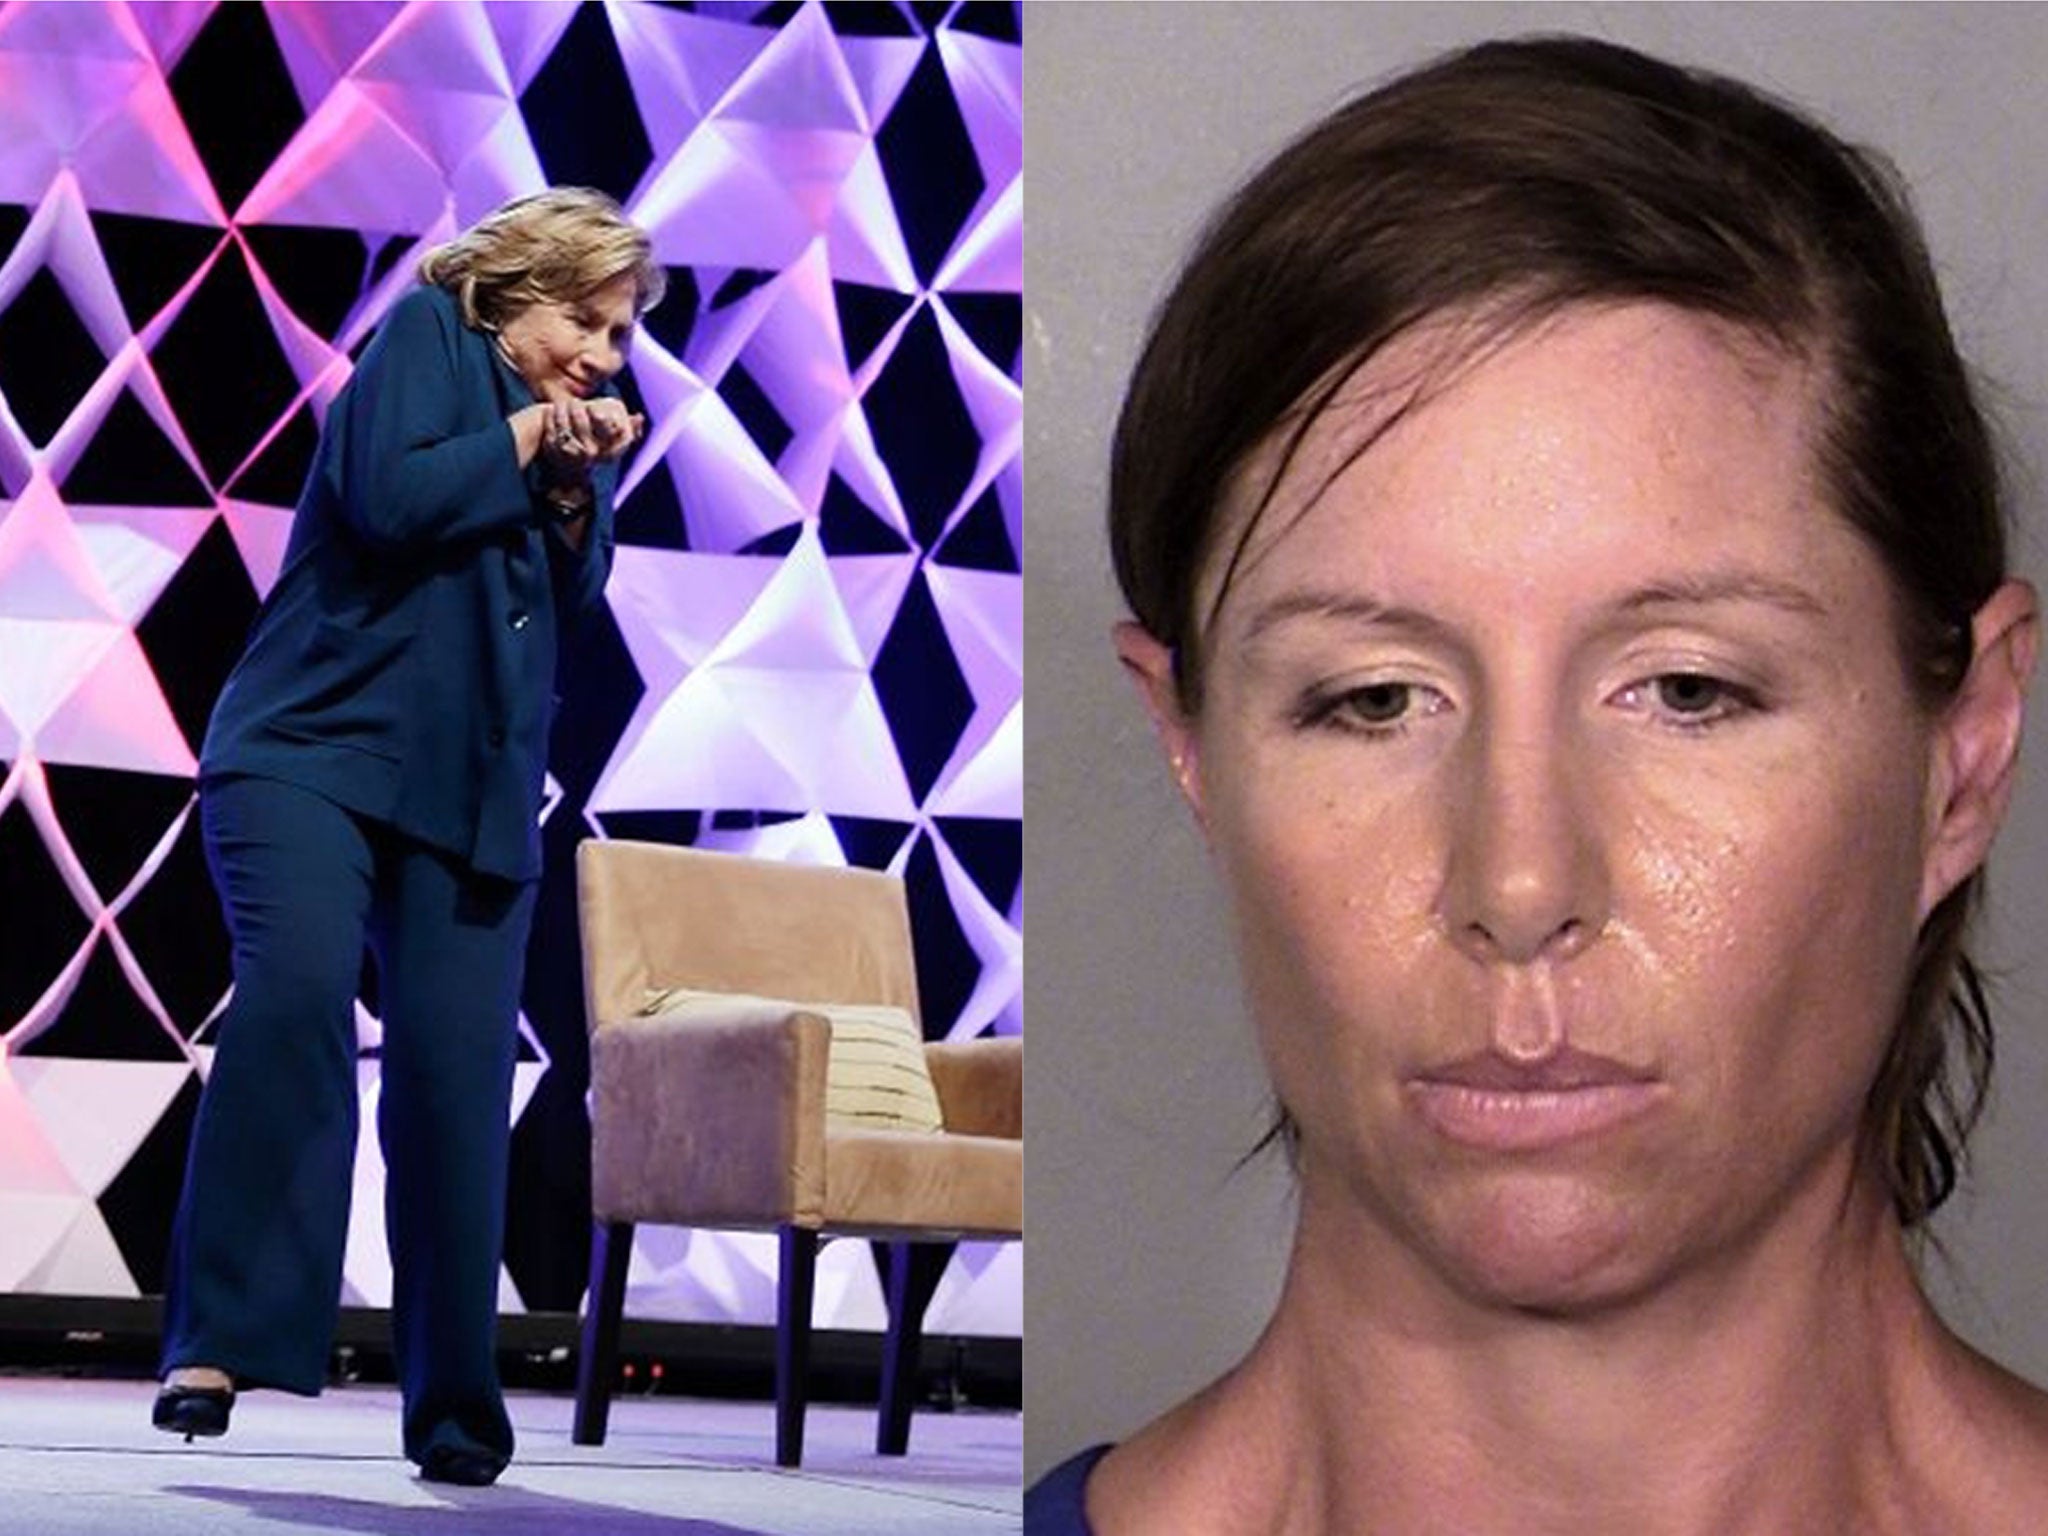 Former Secretary of State Hillary Clinton ducks after a woman threw an shoe toward her during a speech on Thursday. This image provided by the Las Vegas Metropolitan Police Department shows Alison Ernst, who was arrested 10 April.